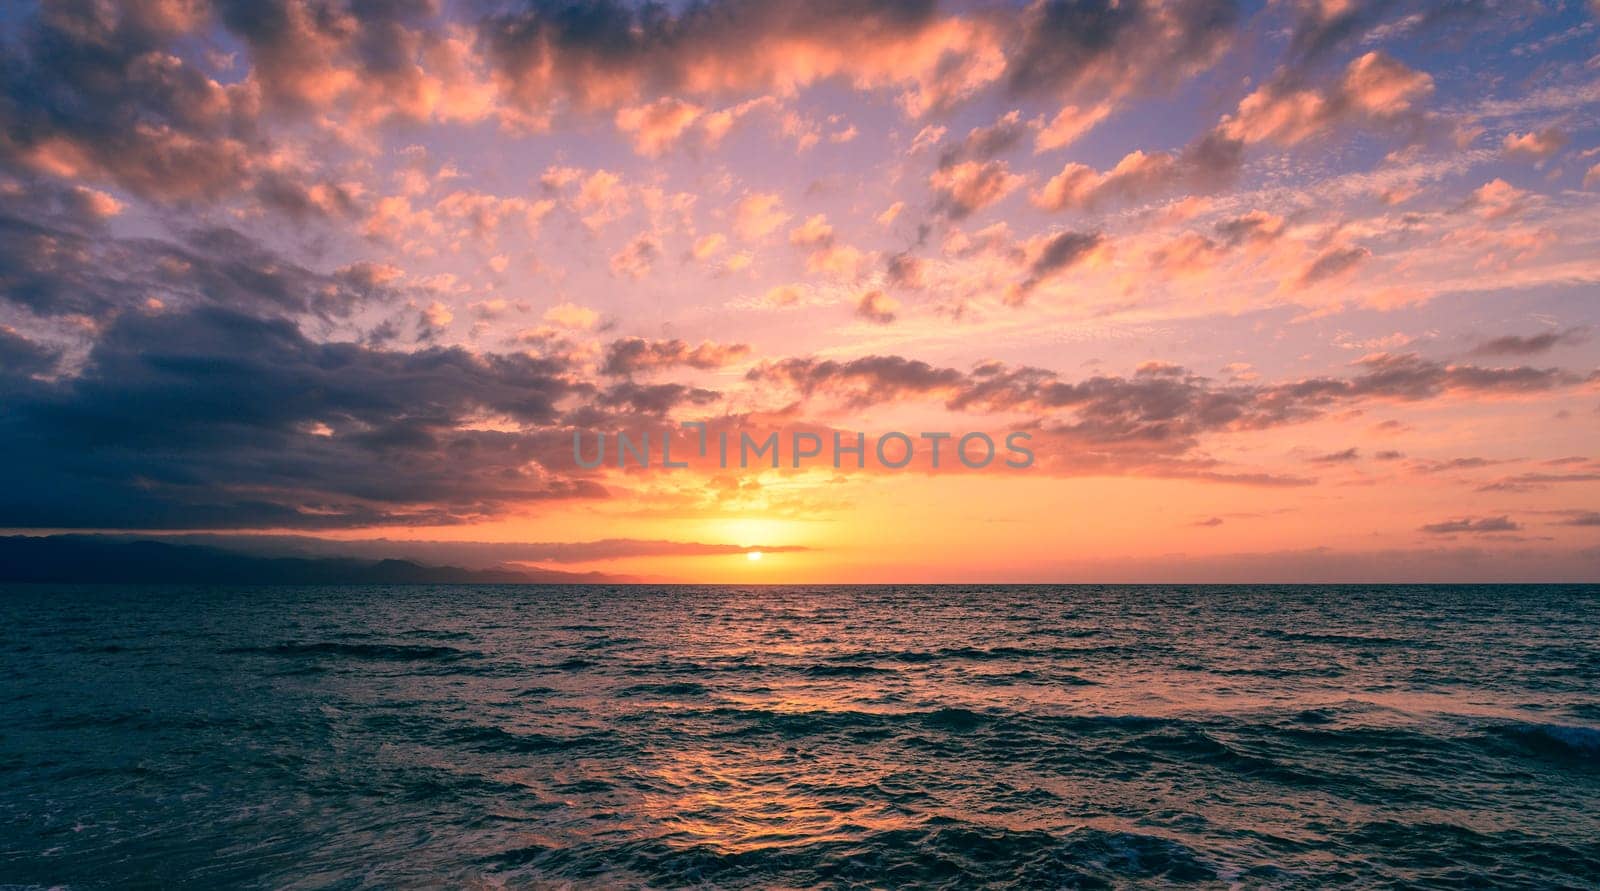 Epic sunset on the Mediterranean sea in Cyprus by Mixa74